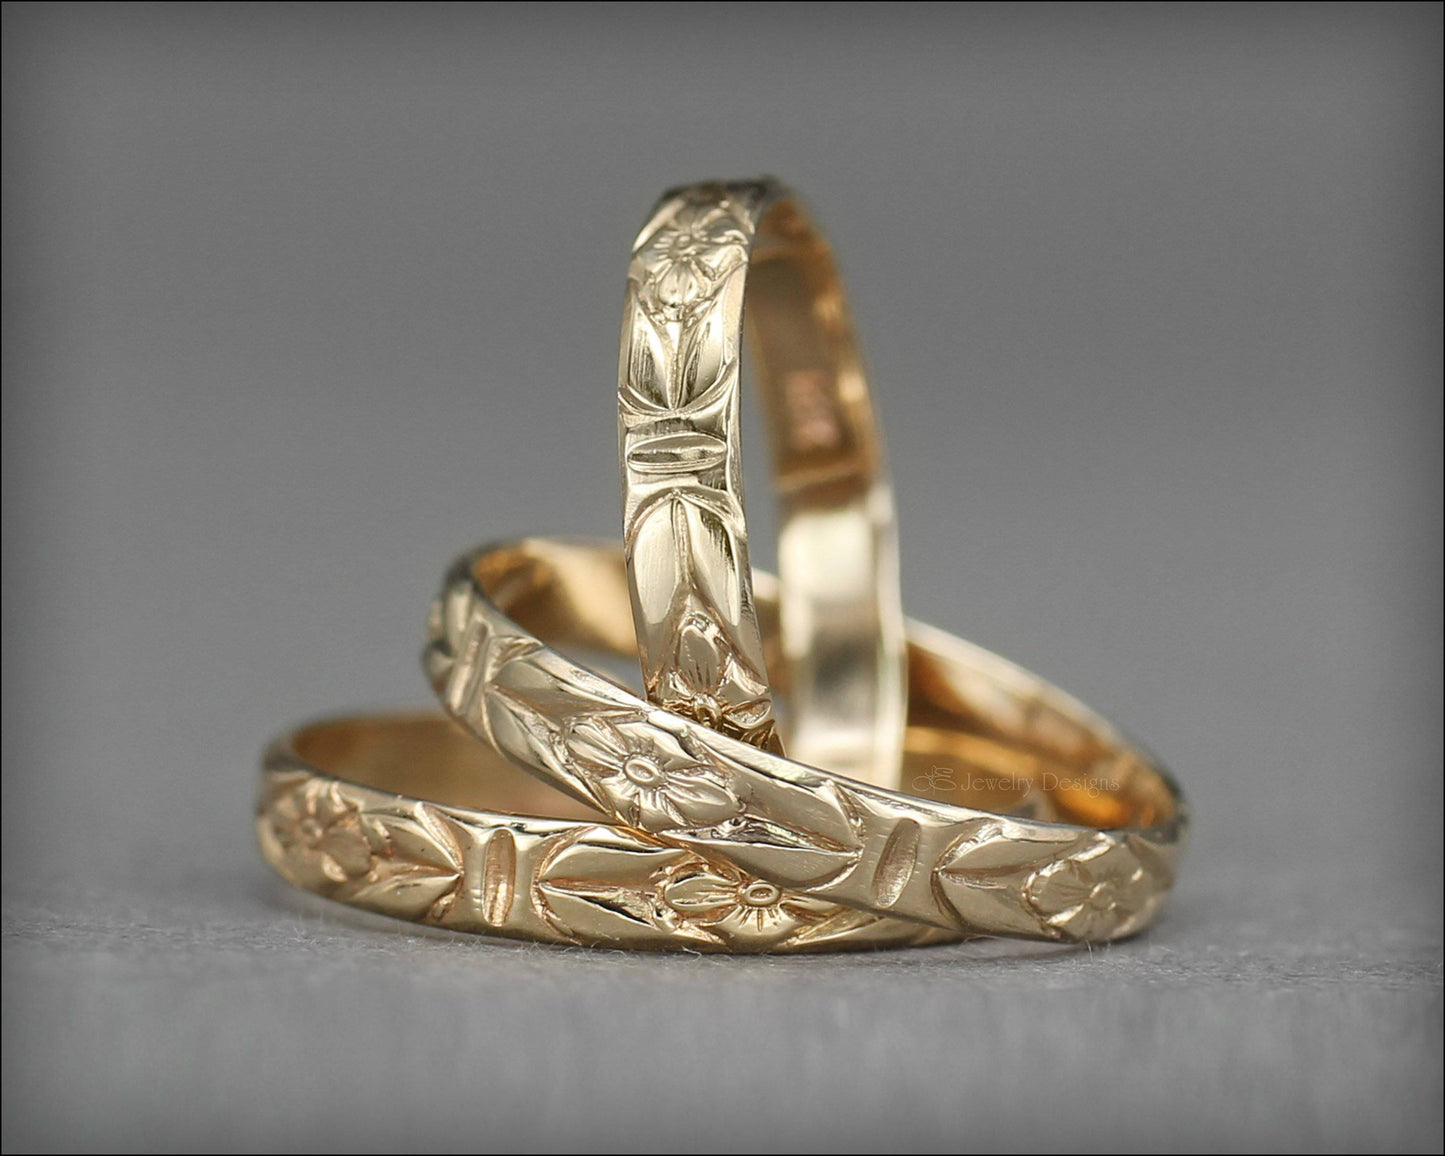 Load image into Gallery viewer, 14k Gold Floral Band - LE Jewelry Designs
